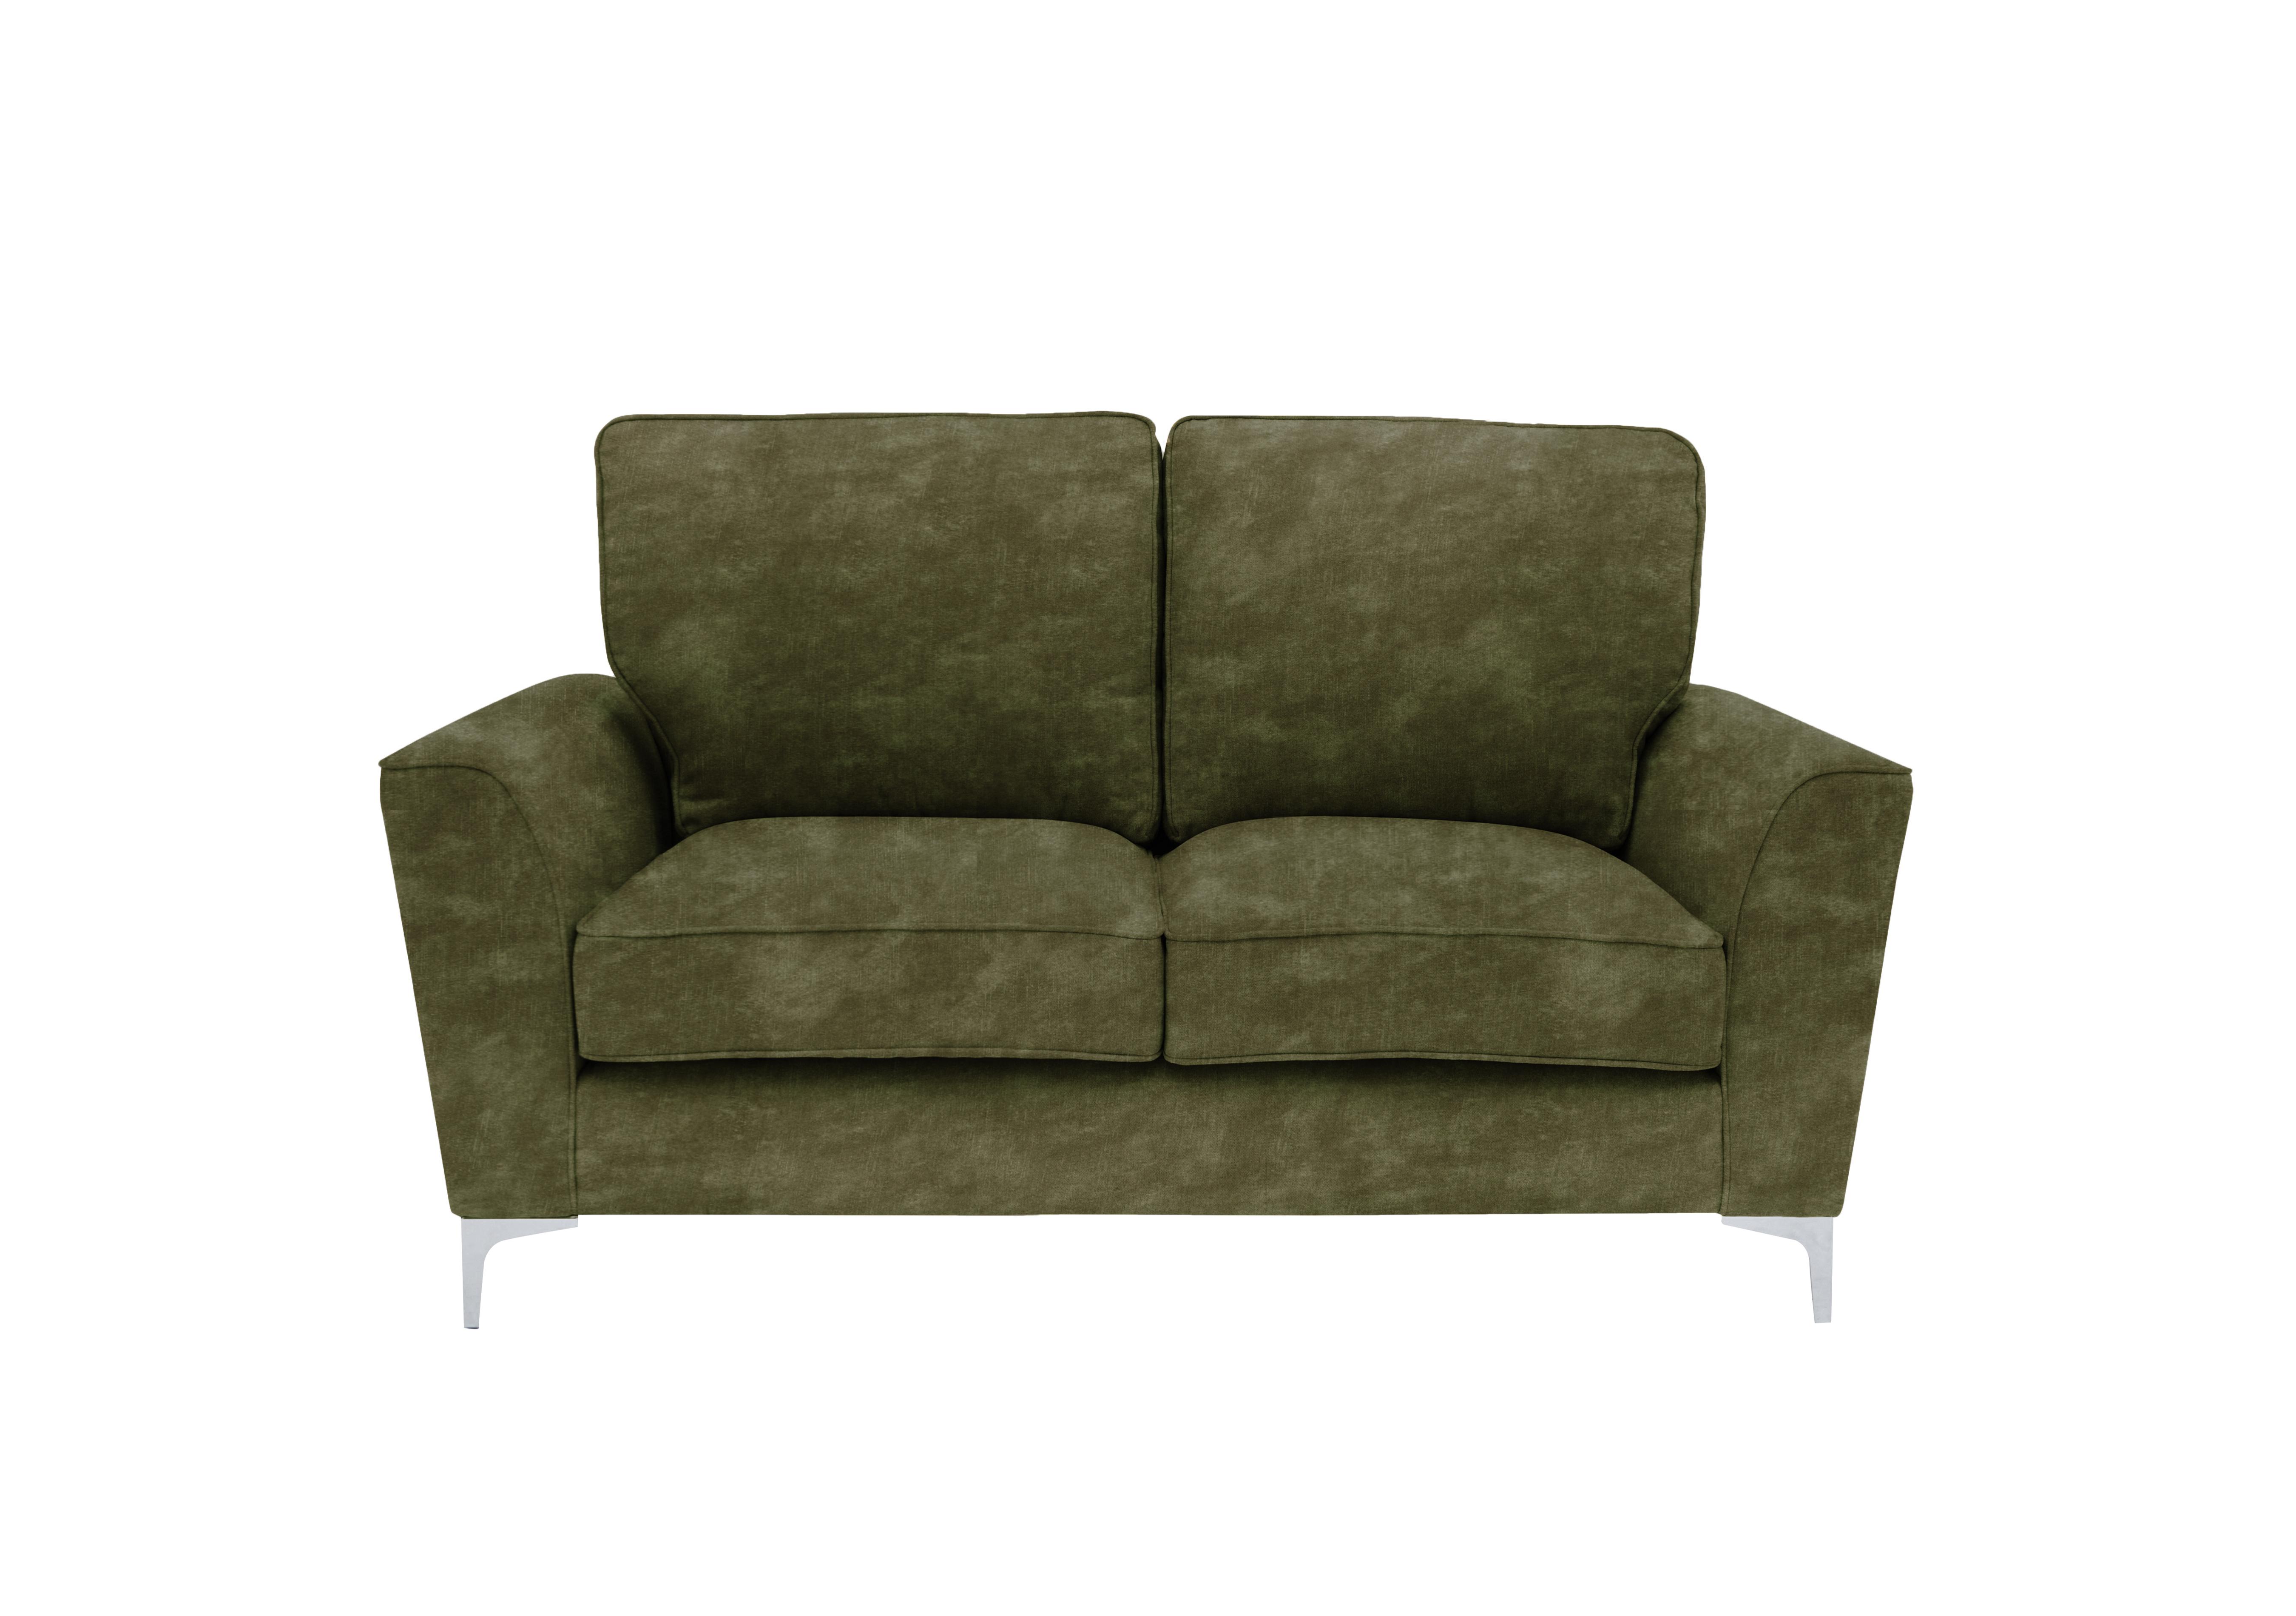 Legend 2 Seater Classic Back Fabric Sofa in Sublime Olive on Furniture Village